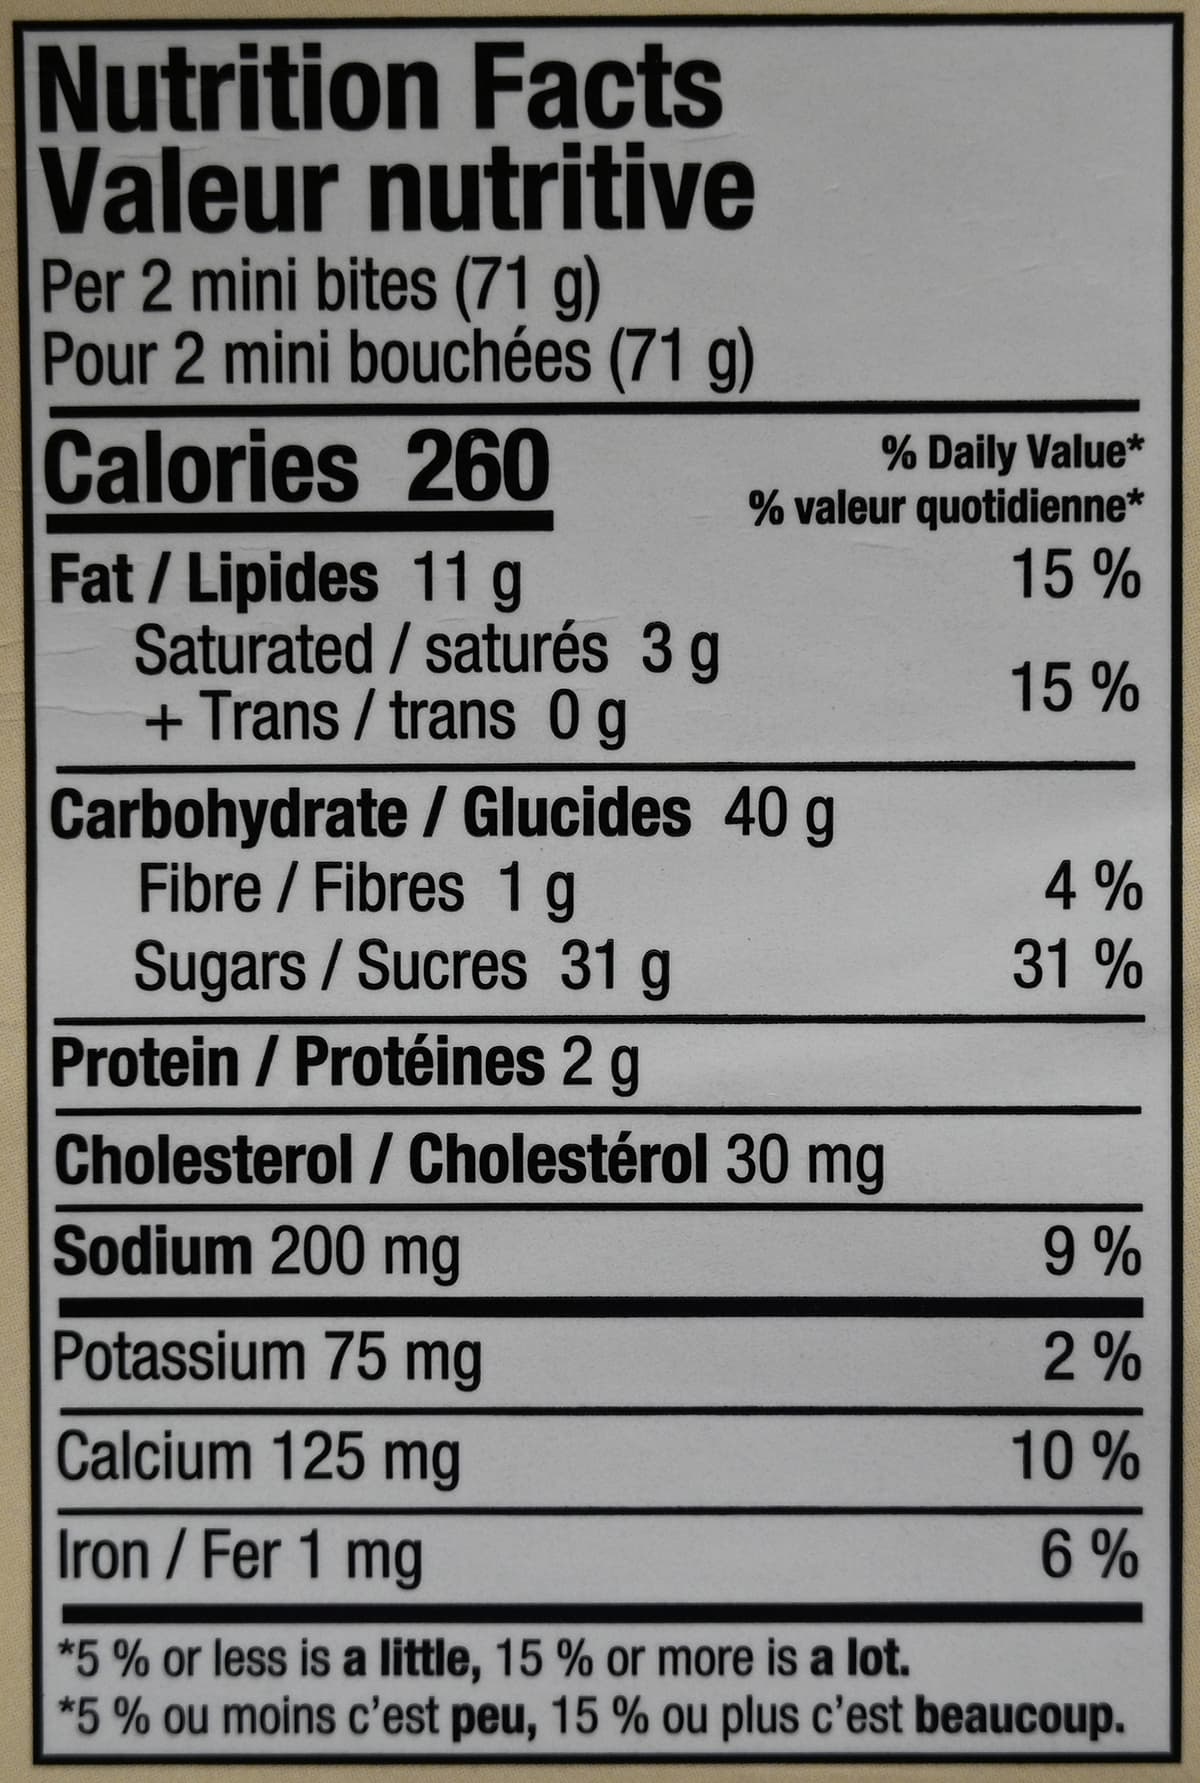 Image of the nutrition facts for the tuxedo cake bites from the package.